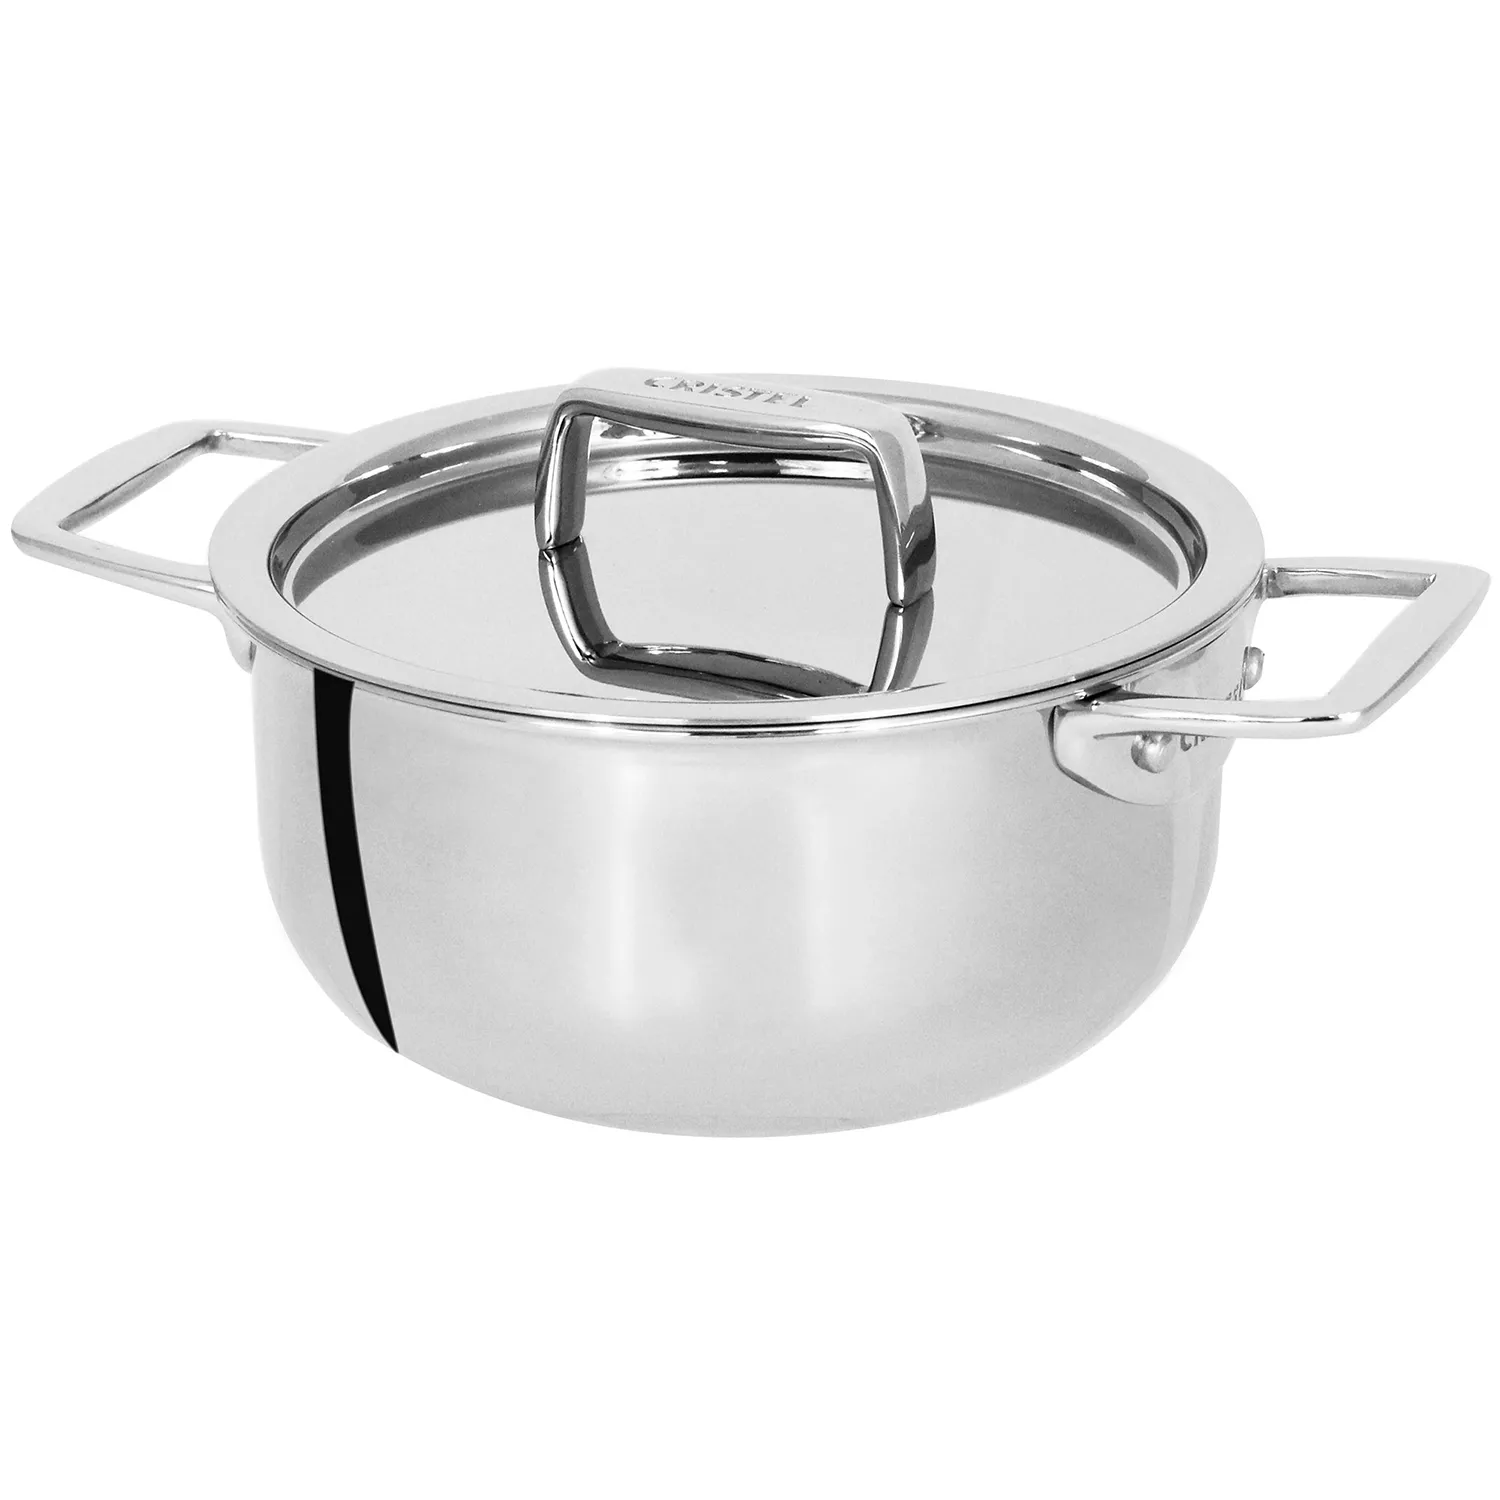 Cristel Castel'Pro 5-Ply Stewpots with Stainless Steel Lid